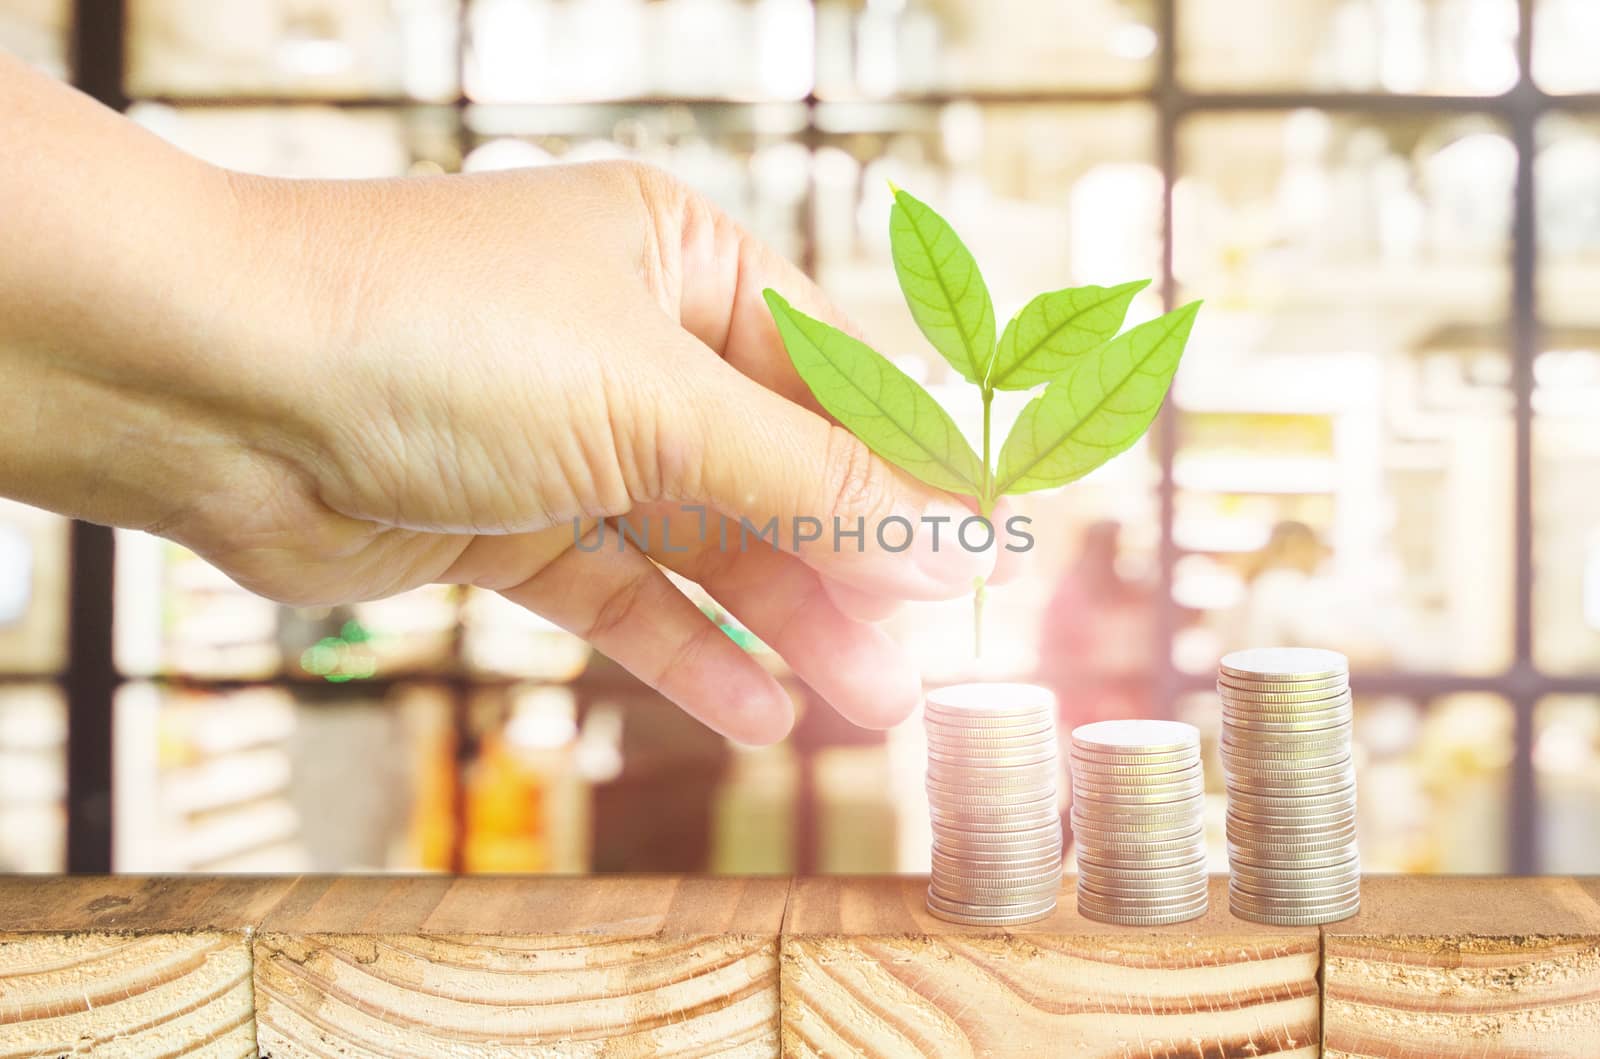 Close-Up Of Female Hand Pick Up The Leaf On The Coin With Office Blur Background ,Business Finance And Money Concept, Business Investment Growth Concept by rakoptonLPN